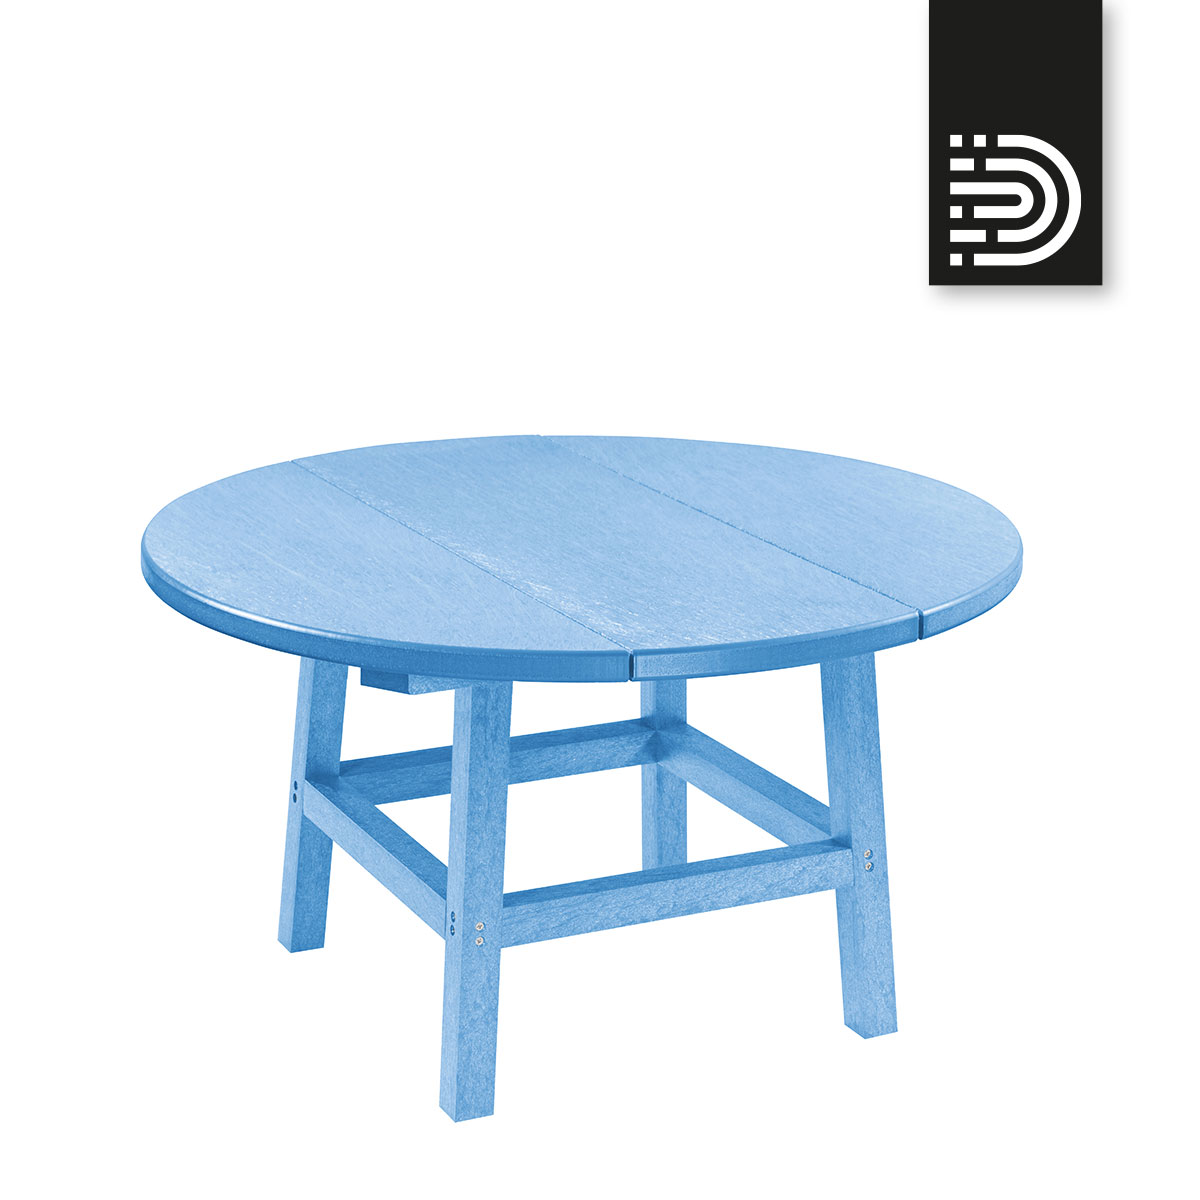 Cocktail Table in Sky blue 12 - TB01+TT03/02